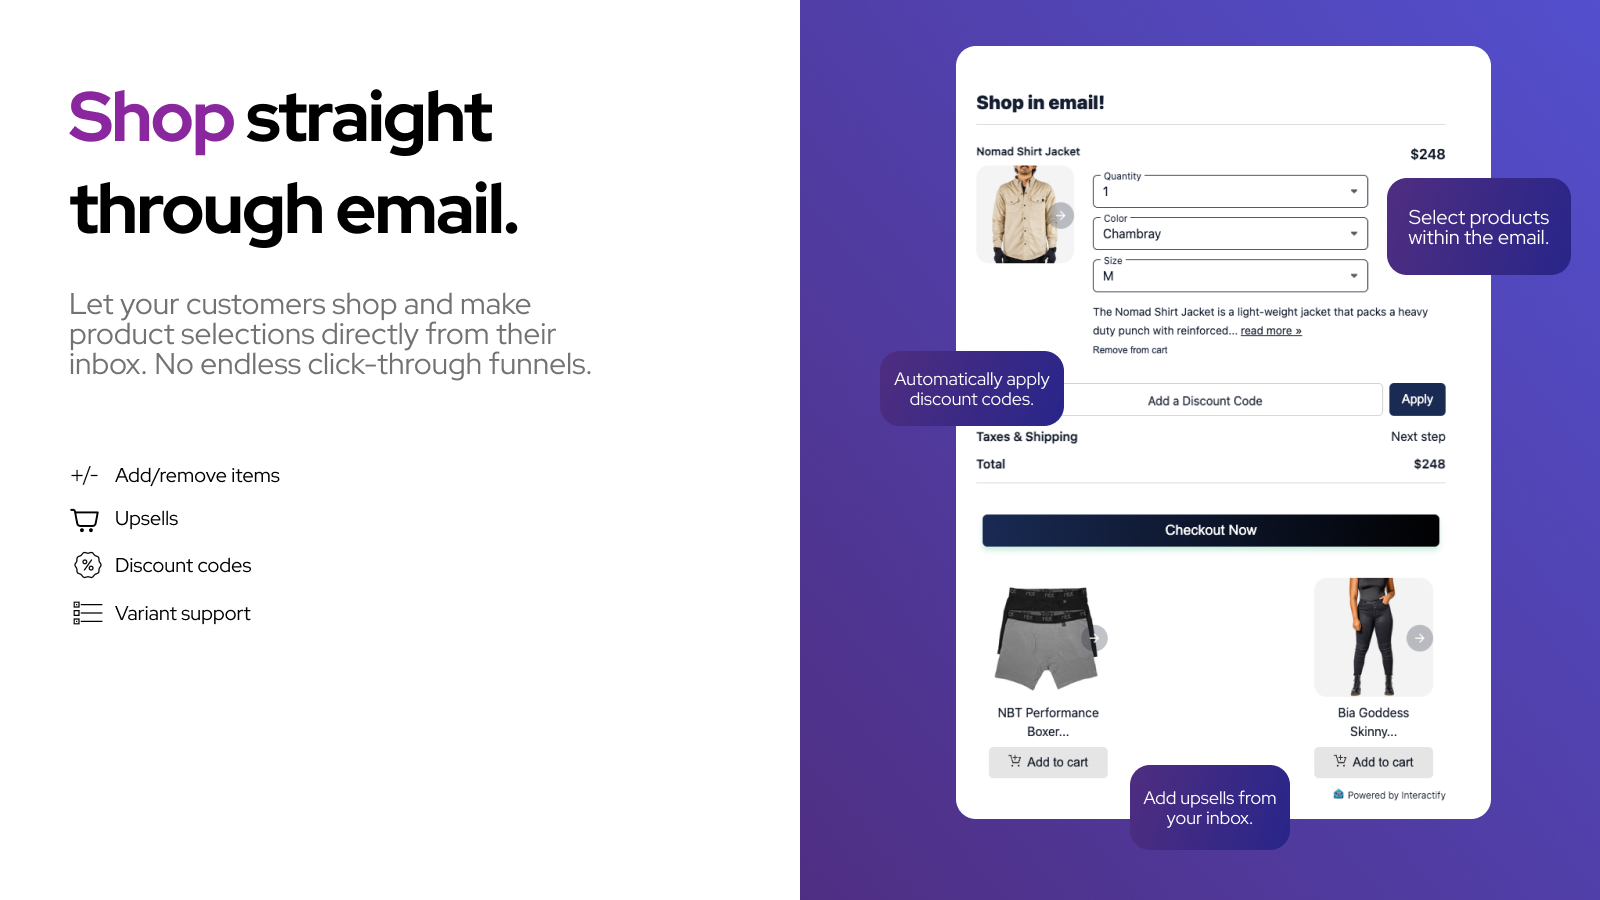 Shop straight through email